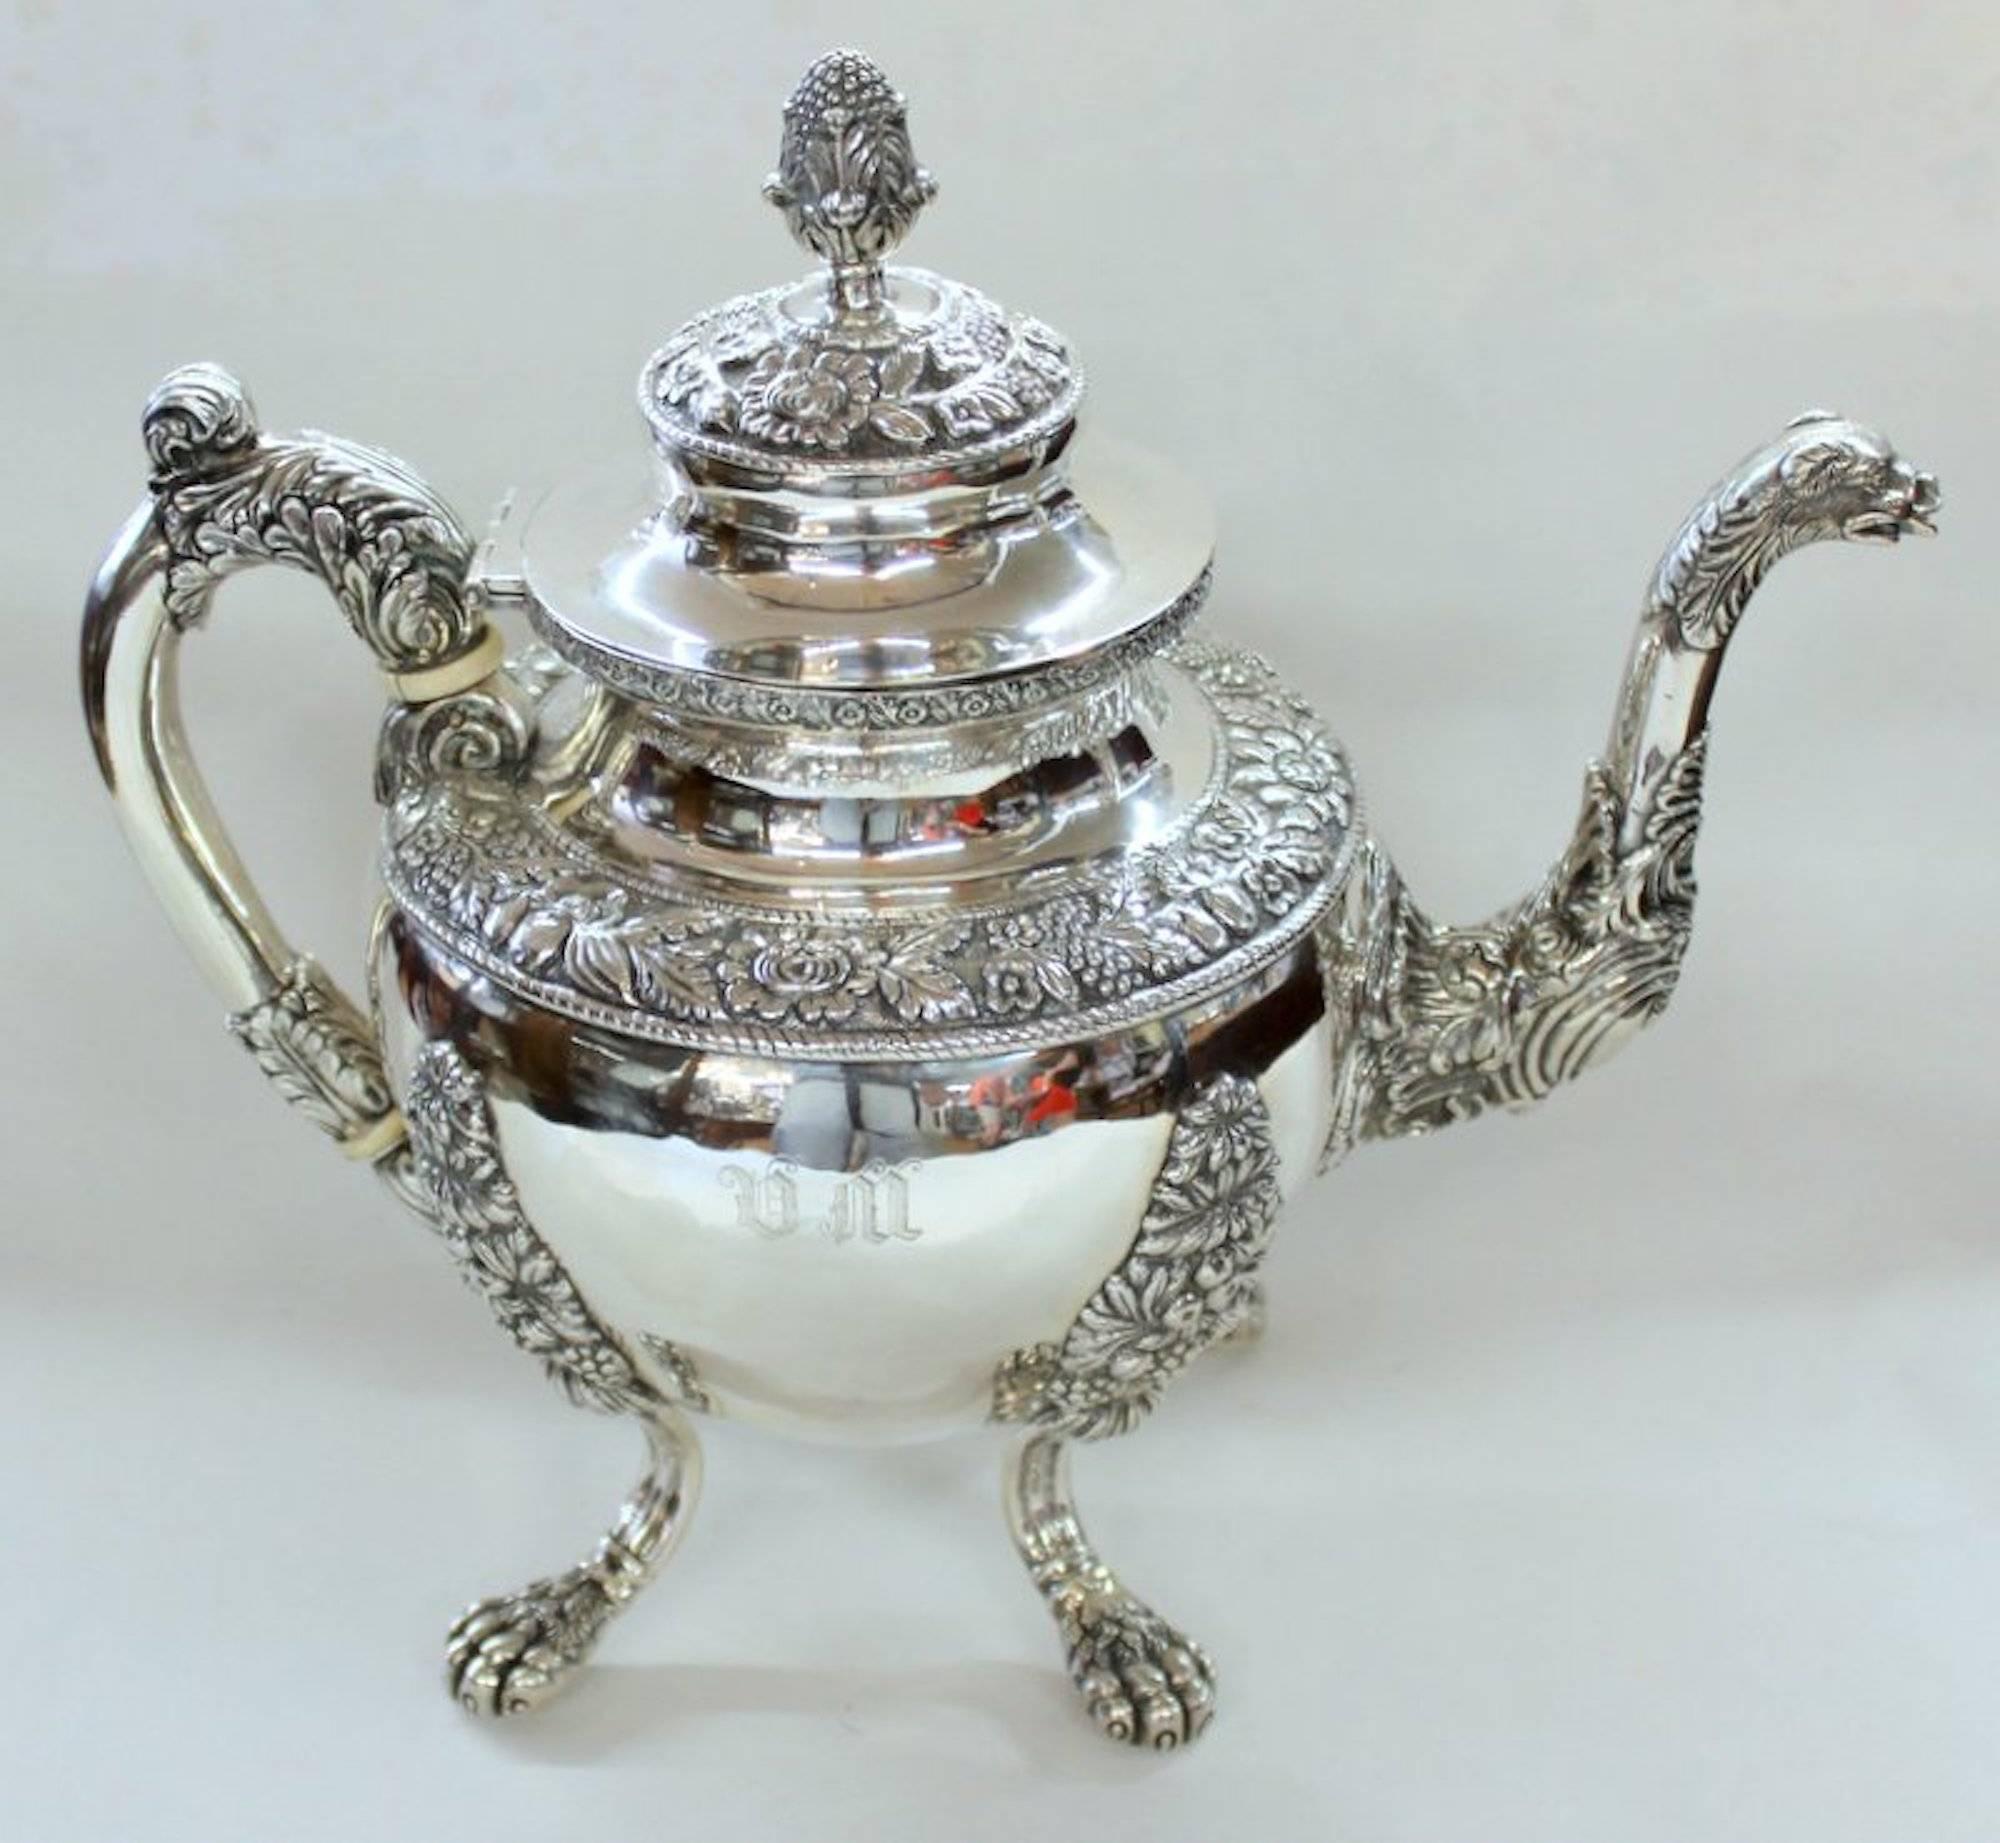 Rare and important antique American extraordinarily heavyweight coin silver (.900 Fine) Rococo style four-piece tea set including exceptional teapot, two handled covered sugar bowl, cream jug and waste bowl.

Maker: Andrew de Milt, New